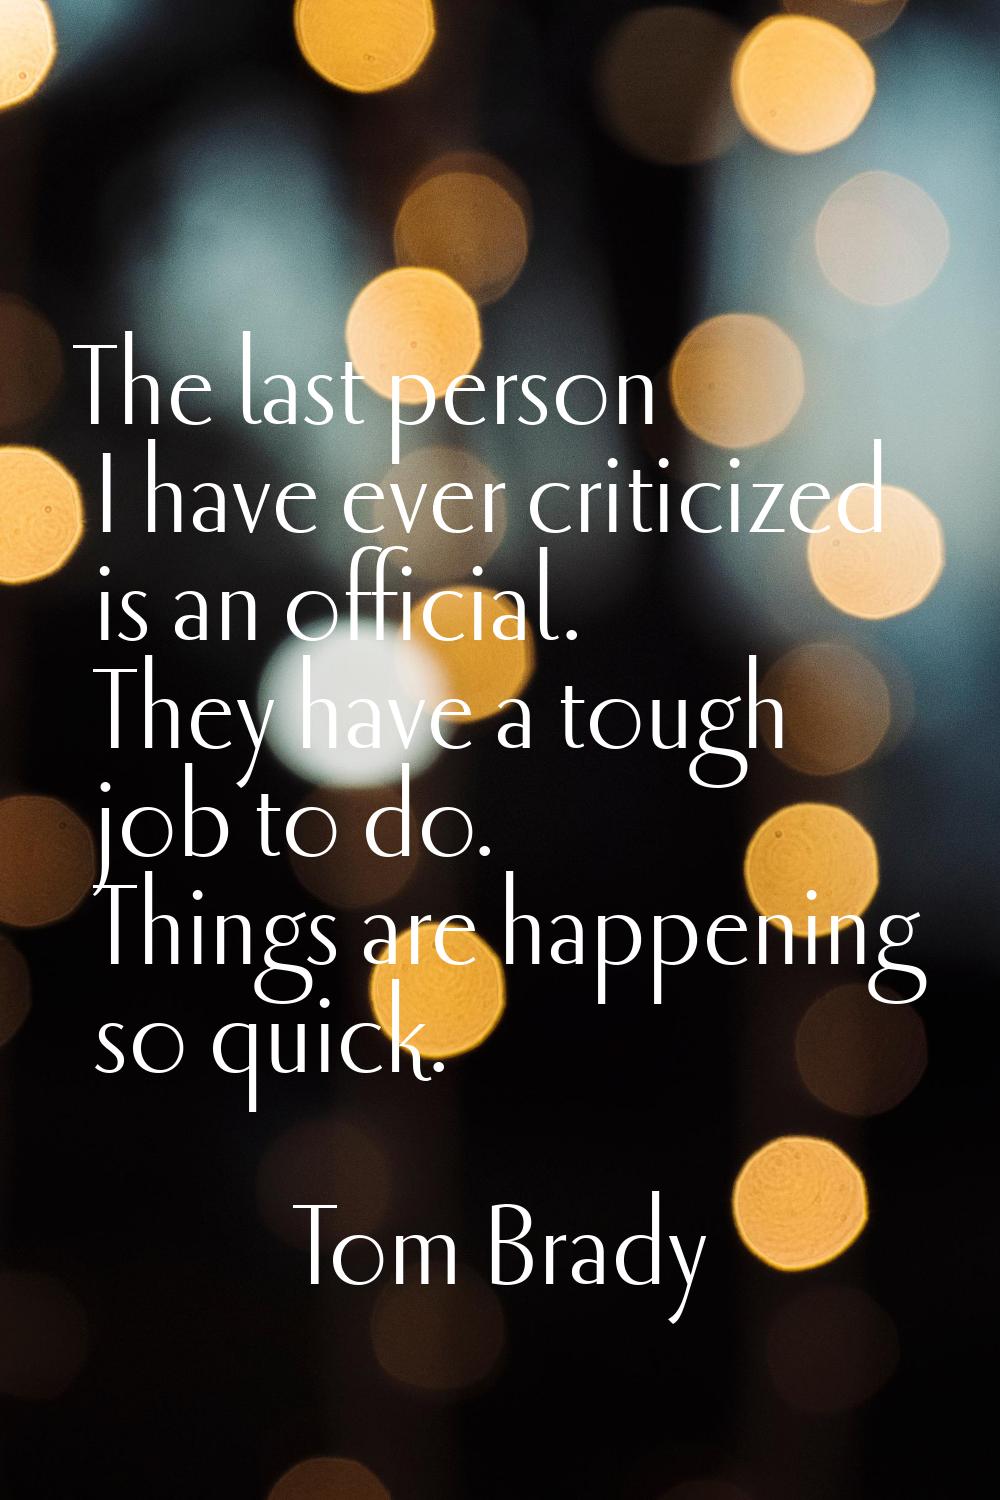 The last person I have ever criticized is an official. They have a tough job to do. Things are happ